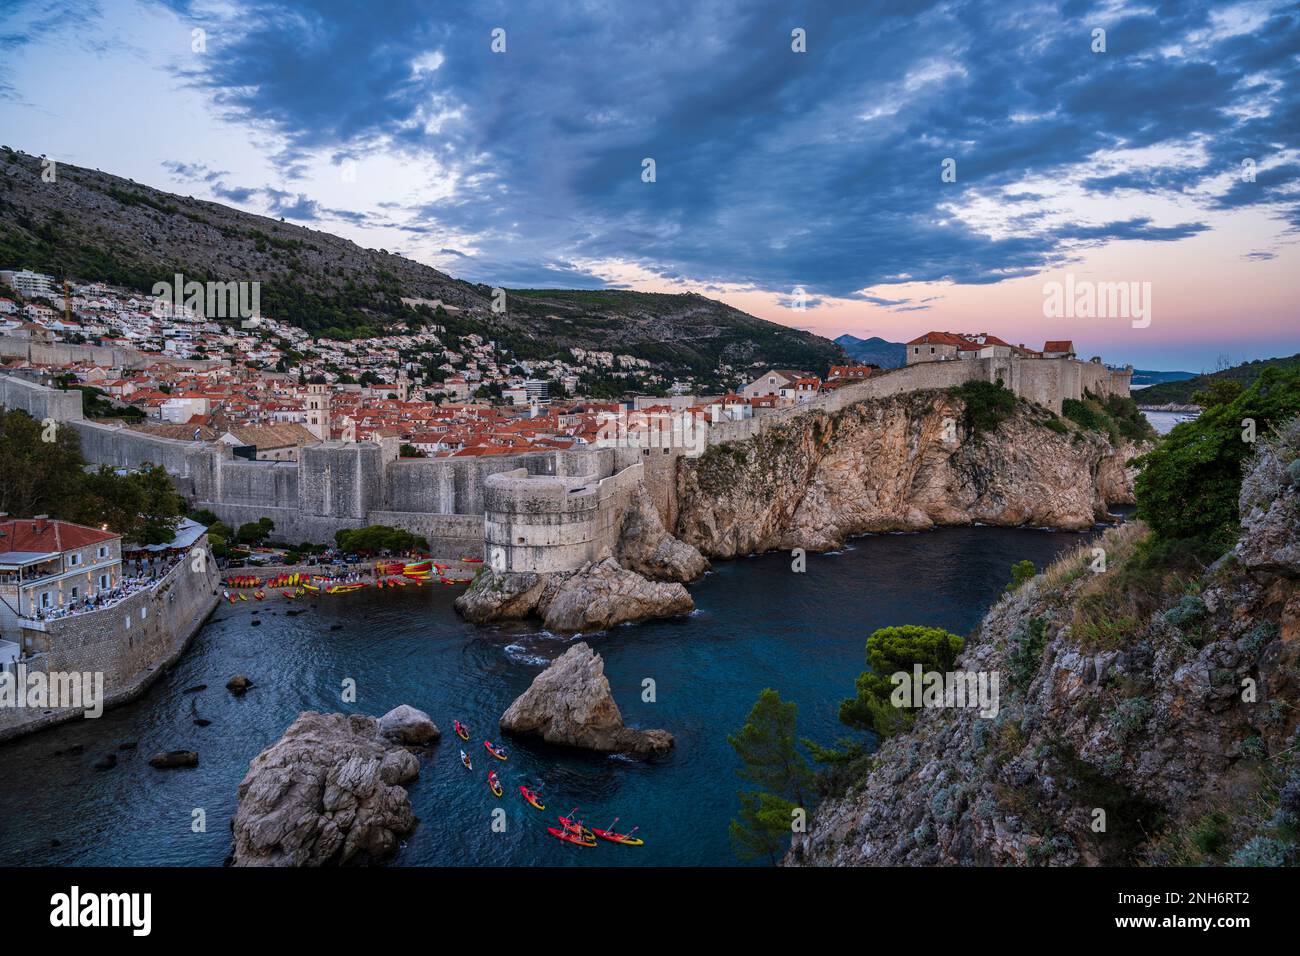 Canoes returning to harbour in Kolorina Bay, with Fort Bokar, town walls and the old town of Dubrovnik in the background, taken at sunset in Croatia Stock Photo